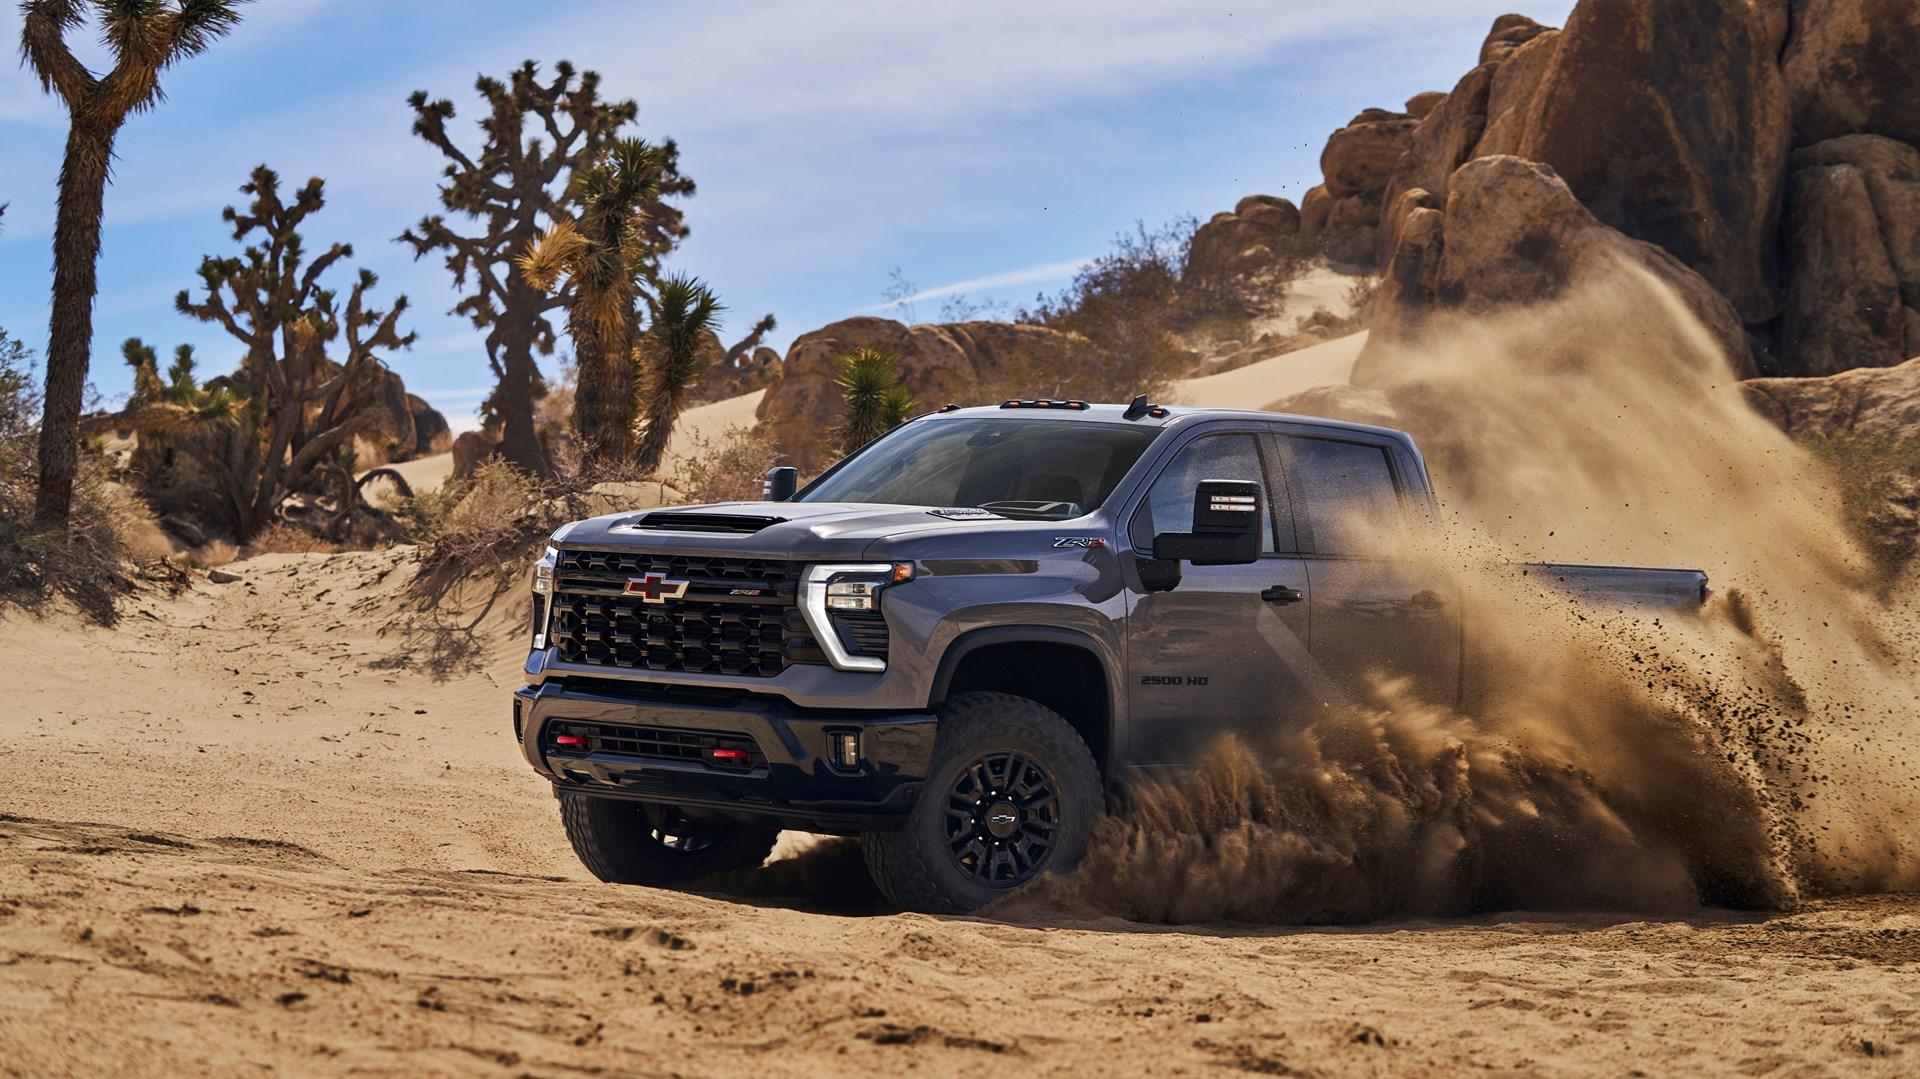 Chevrolet Silverado HD Zr2 Off Road Pack Launches For